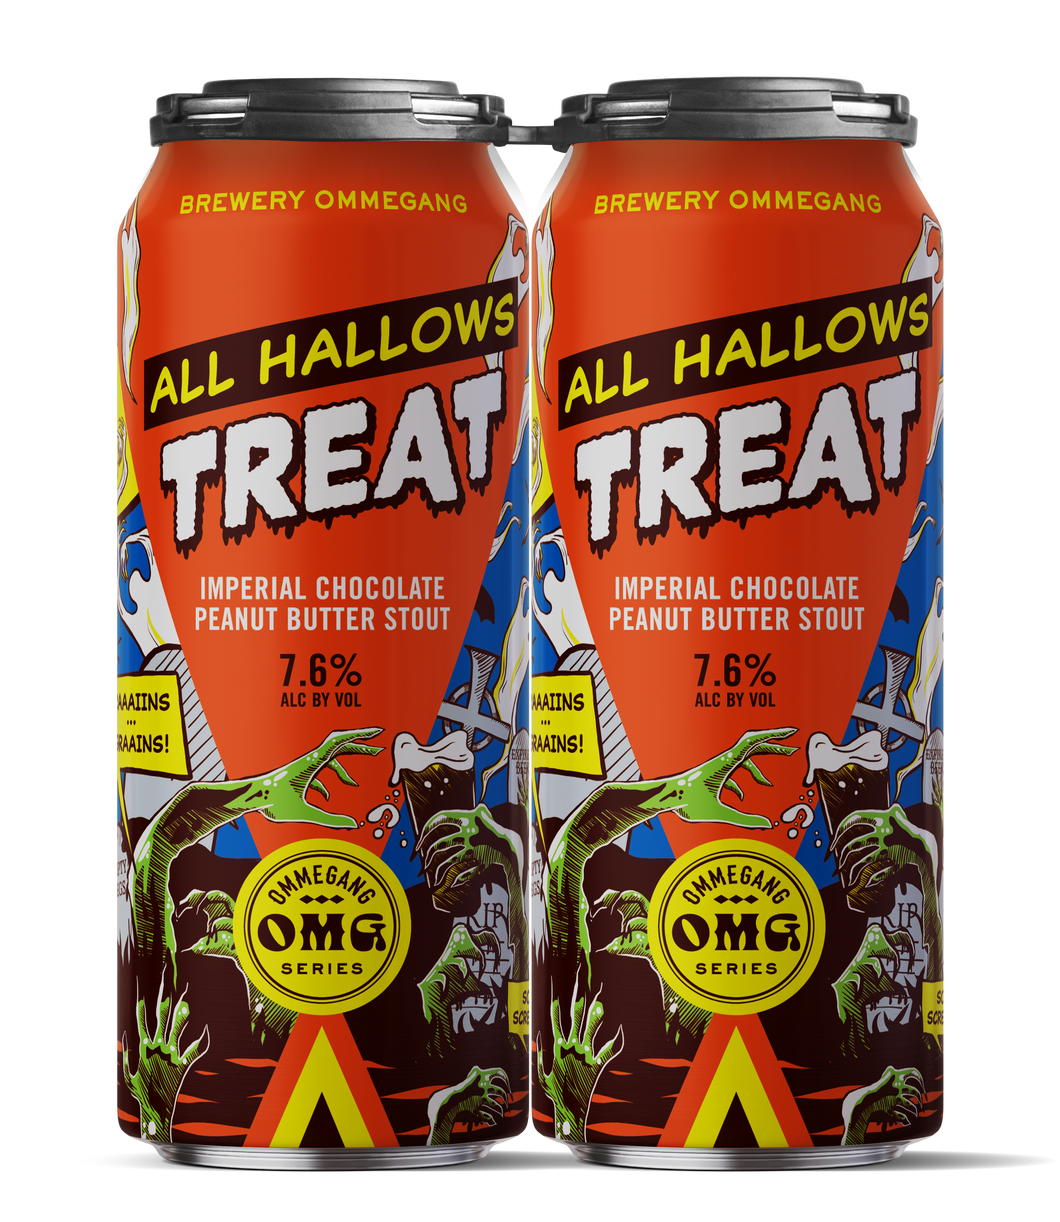 All Hallows Treat 4 Pack